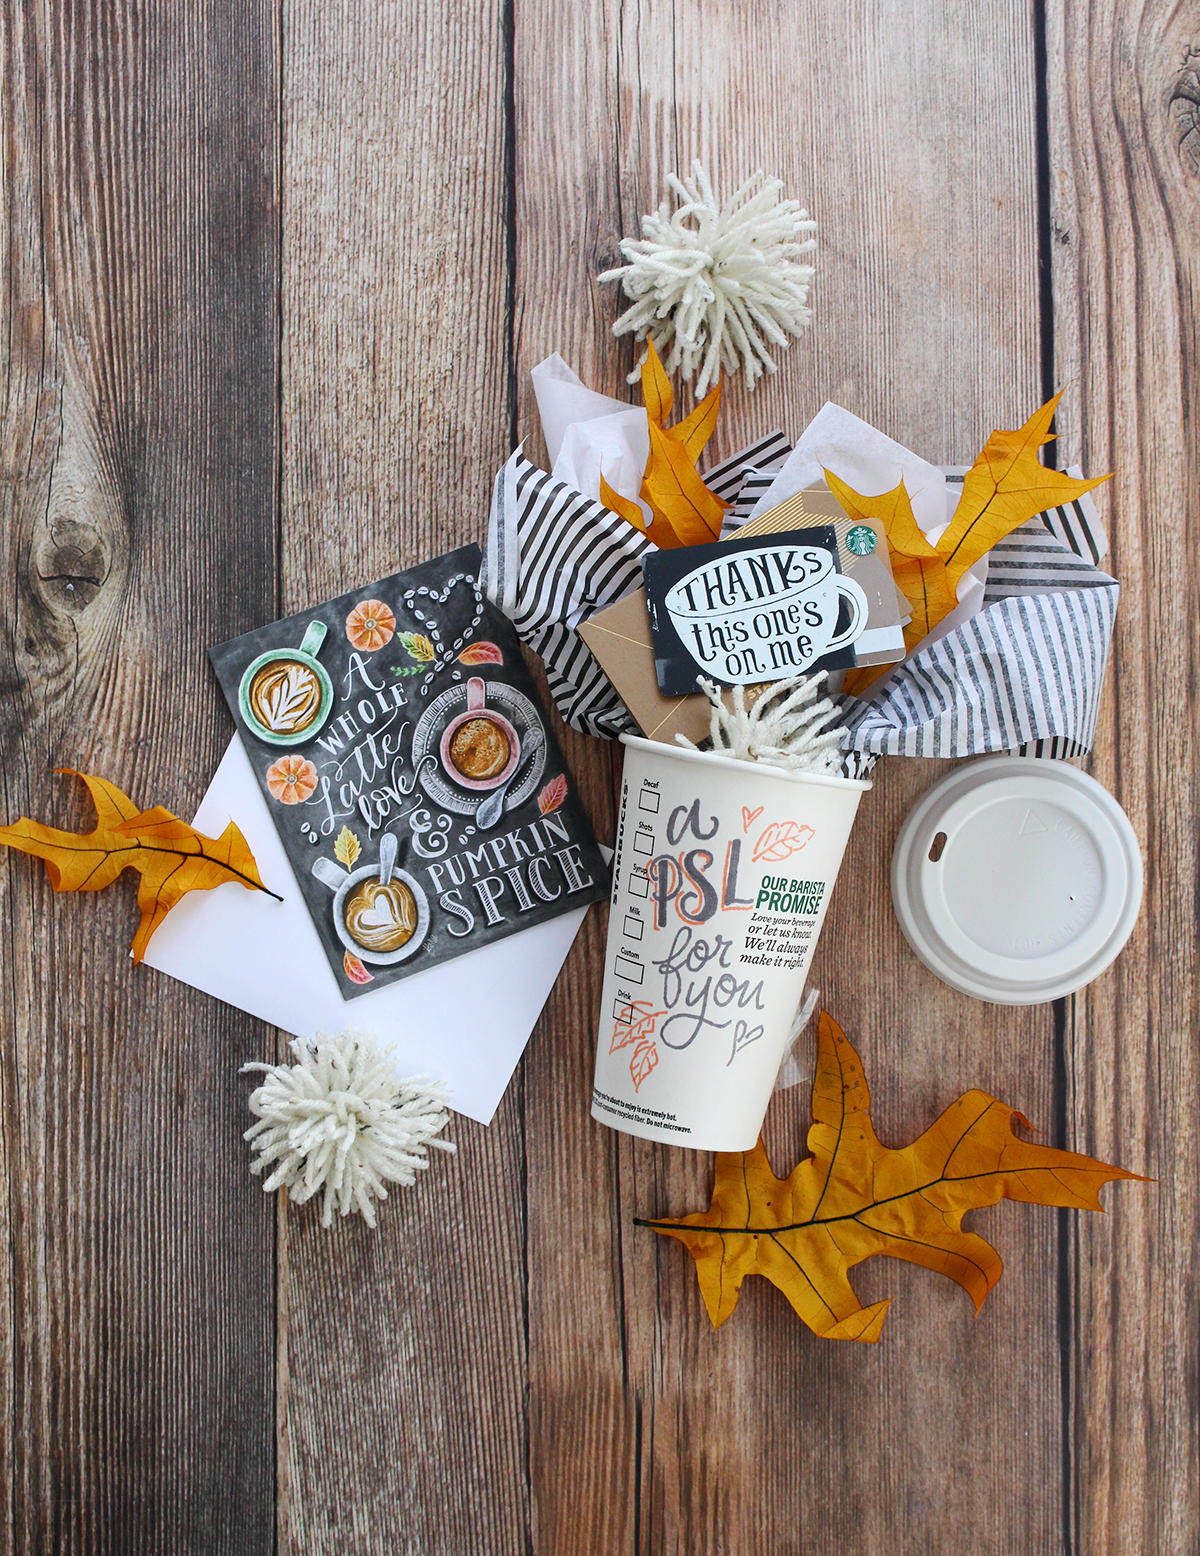 An easy fall gift idea for spreading the pumpkin spice love: hand letter on a starbucks cup, then fill it with a $5 Starbucks gift card and a Lily & Val Pumpkin spice latte card!